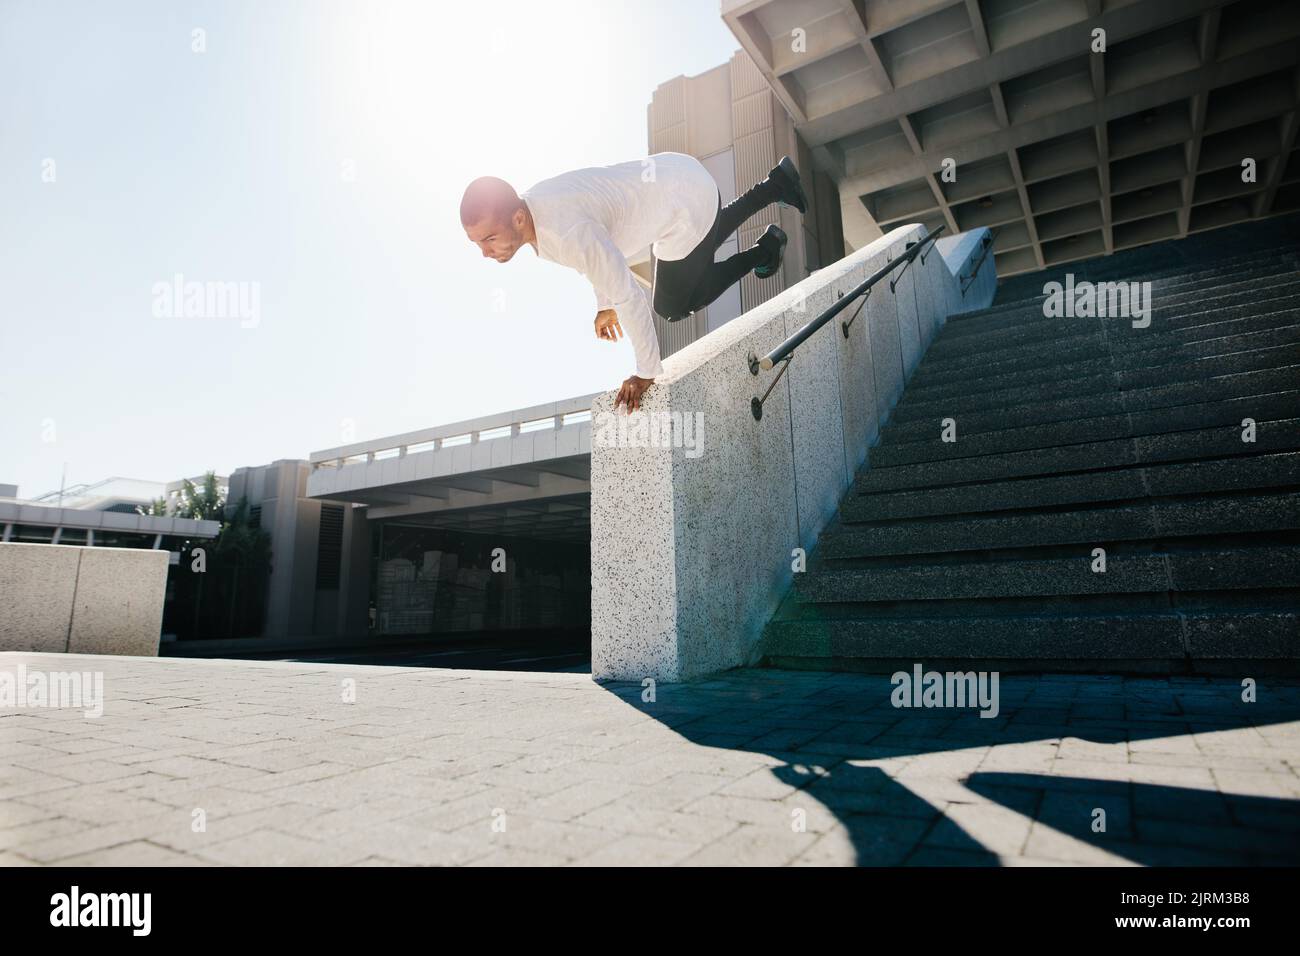 Young sportsman practicing parkour and free running outdoor by doing a wall spin. Sporty young practicing parkour in an urban space. Stock Photo